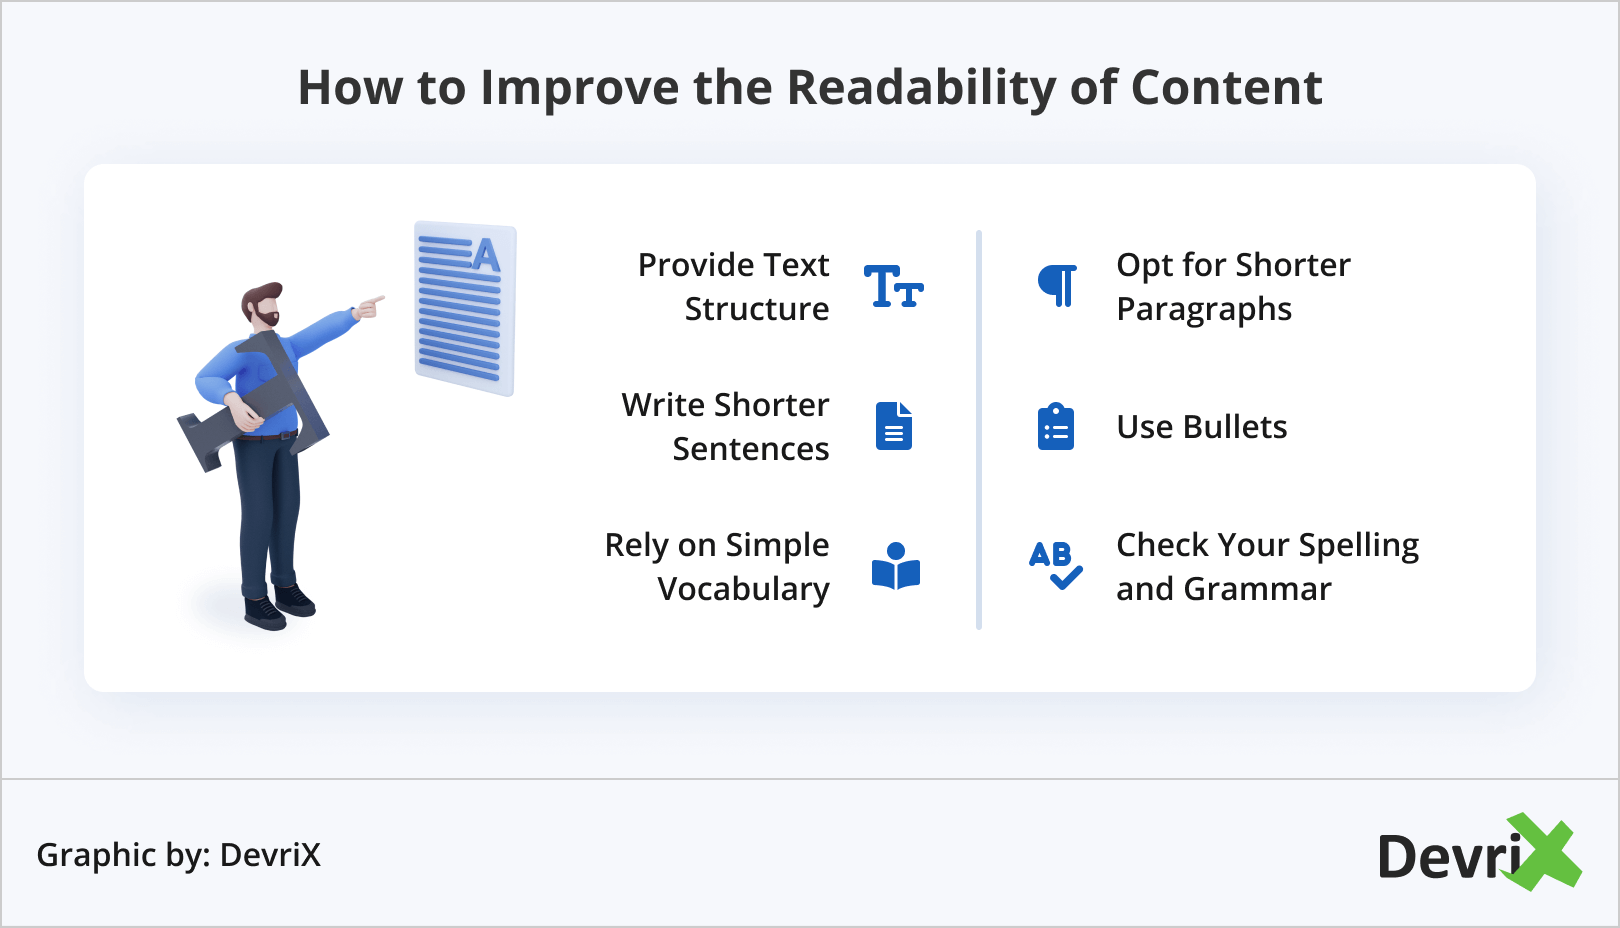 How to Improve the Readability of Content